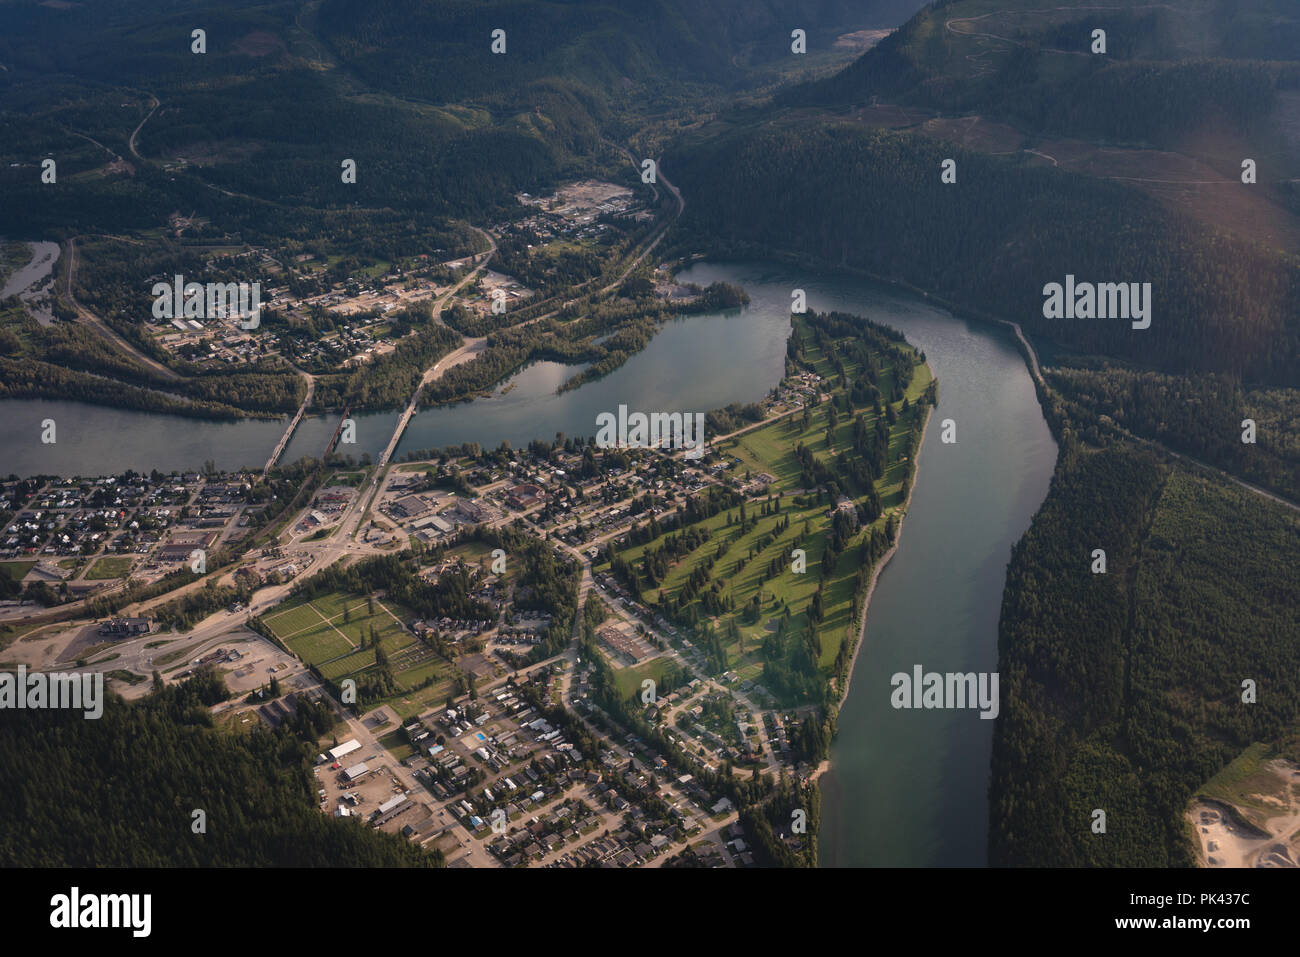 Aerial view of river and rural area Stock Photo